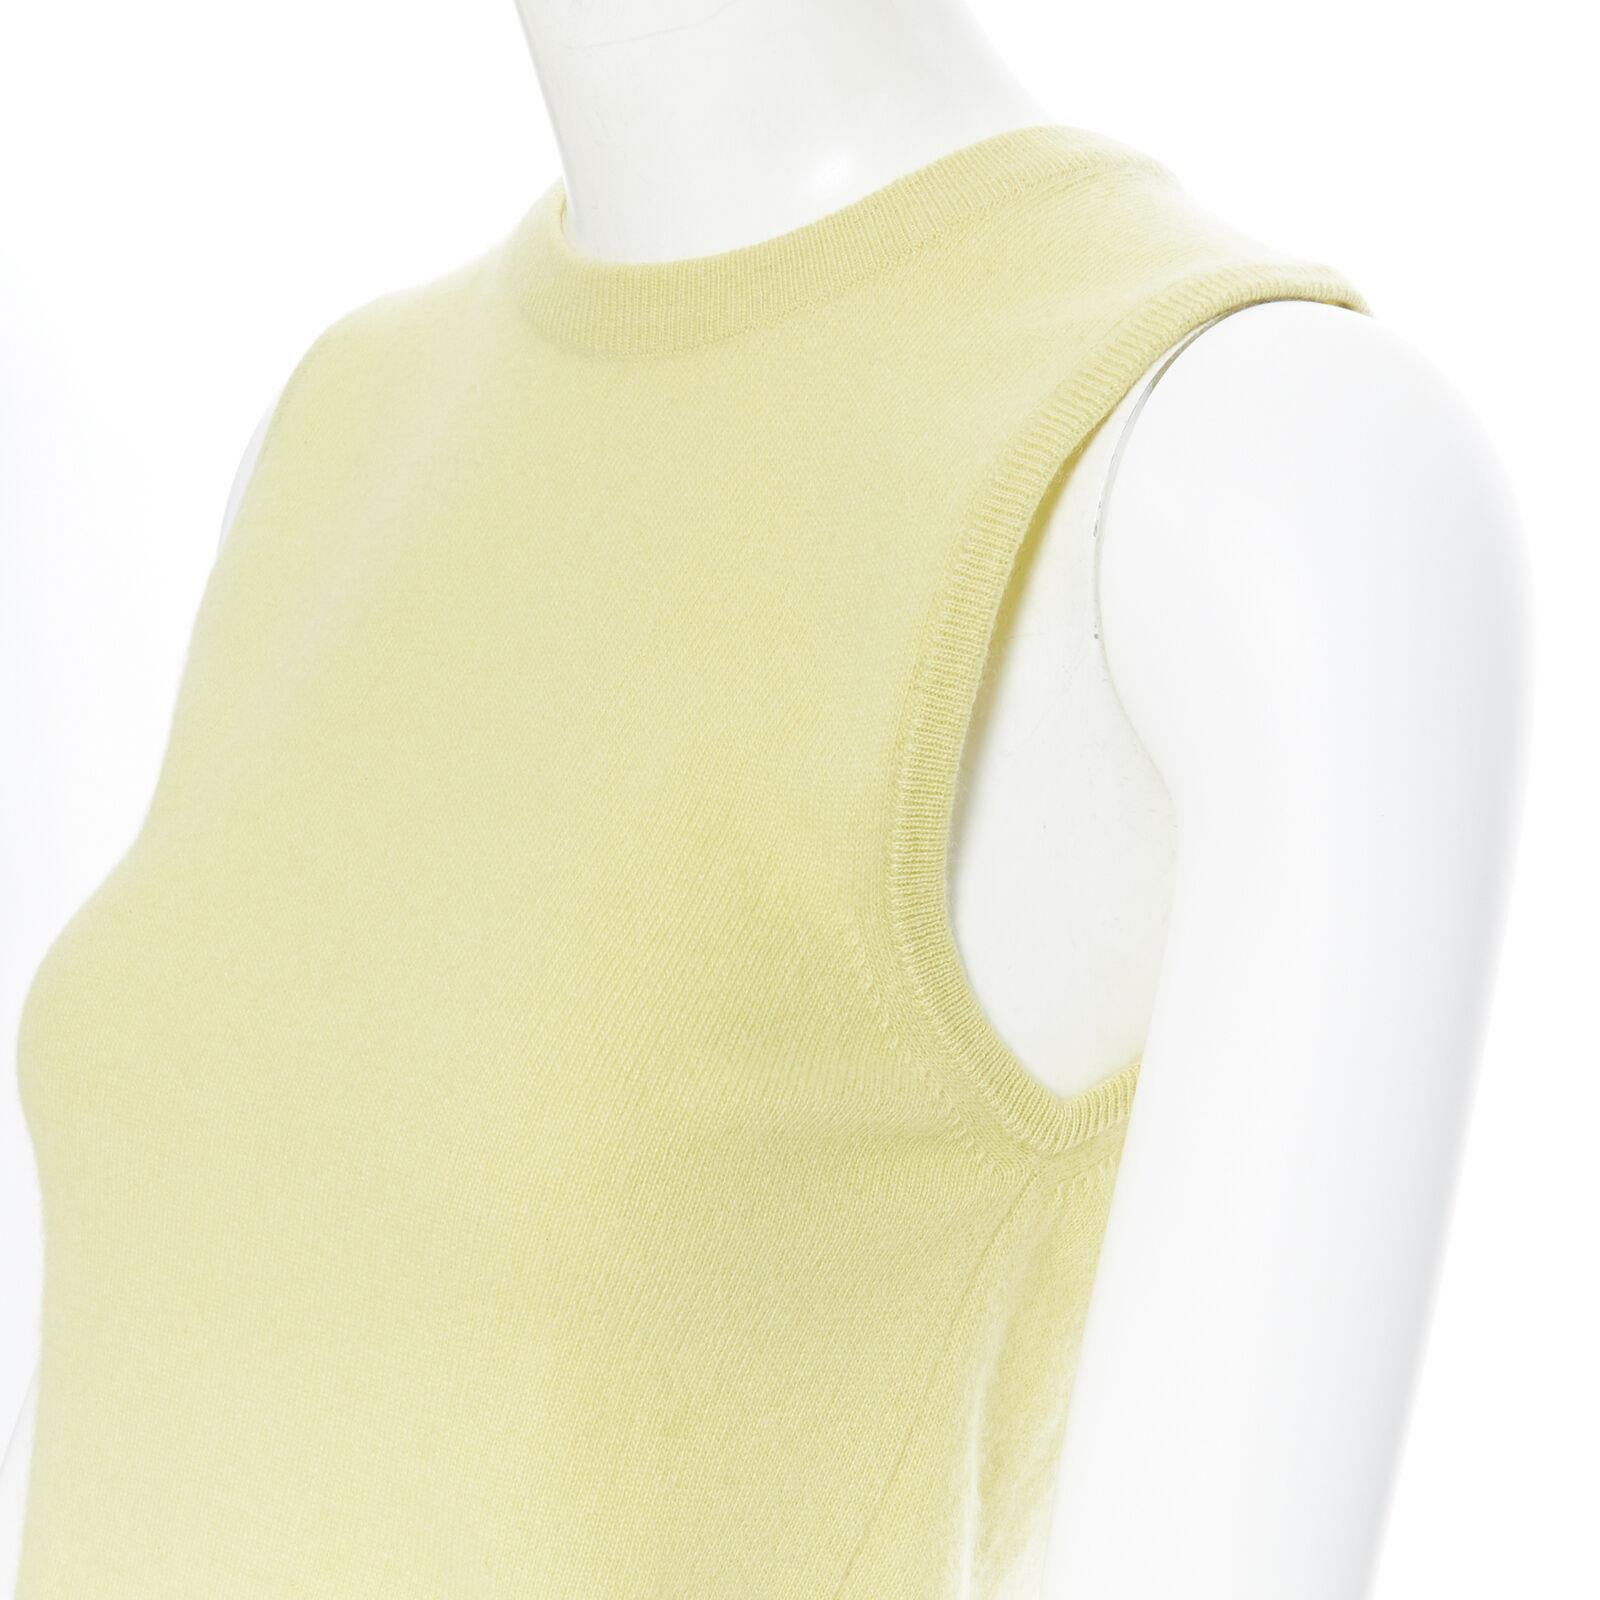 vintage HERMES 100% pure cashmere yellow knitted short sleeveless vest sweater S 1